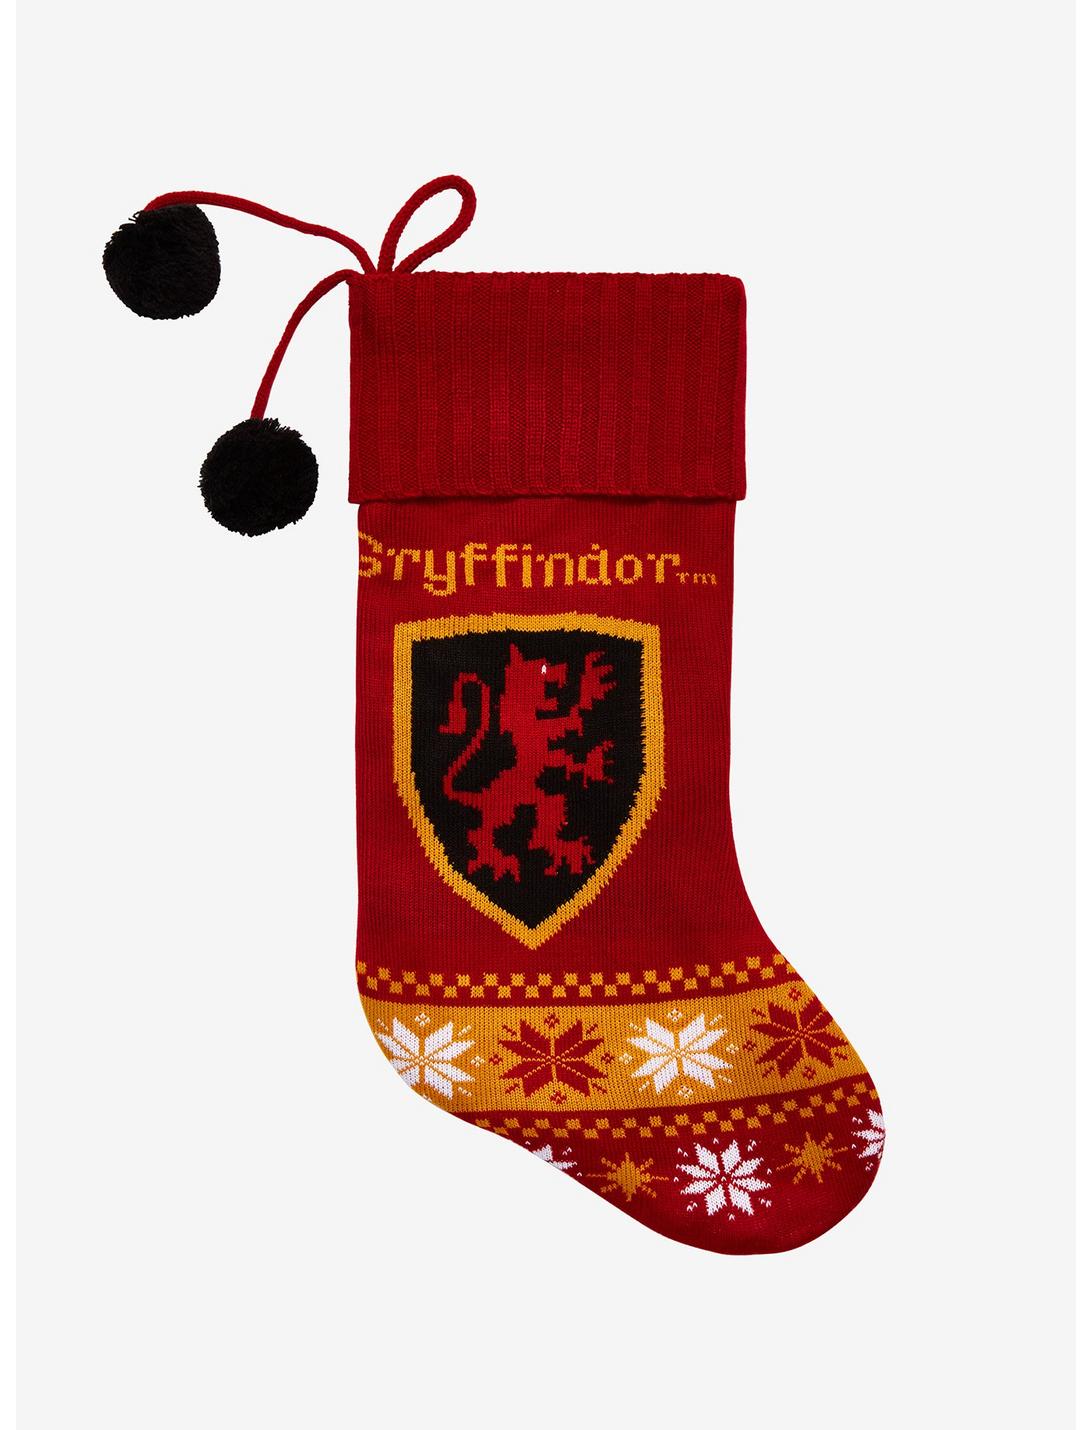 Harry Potter Gryffindor Knit Stocking Hot Topic Exclusive, , hi-res